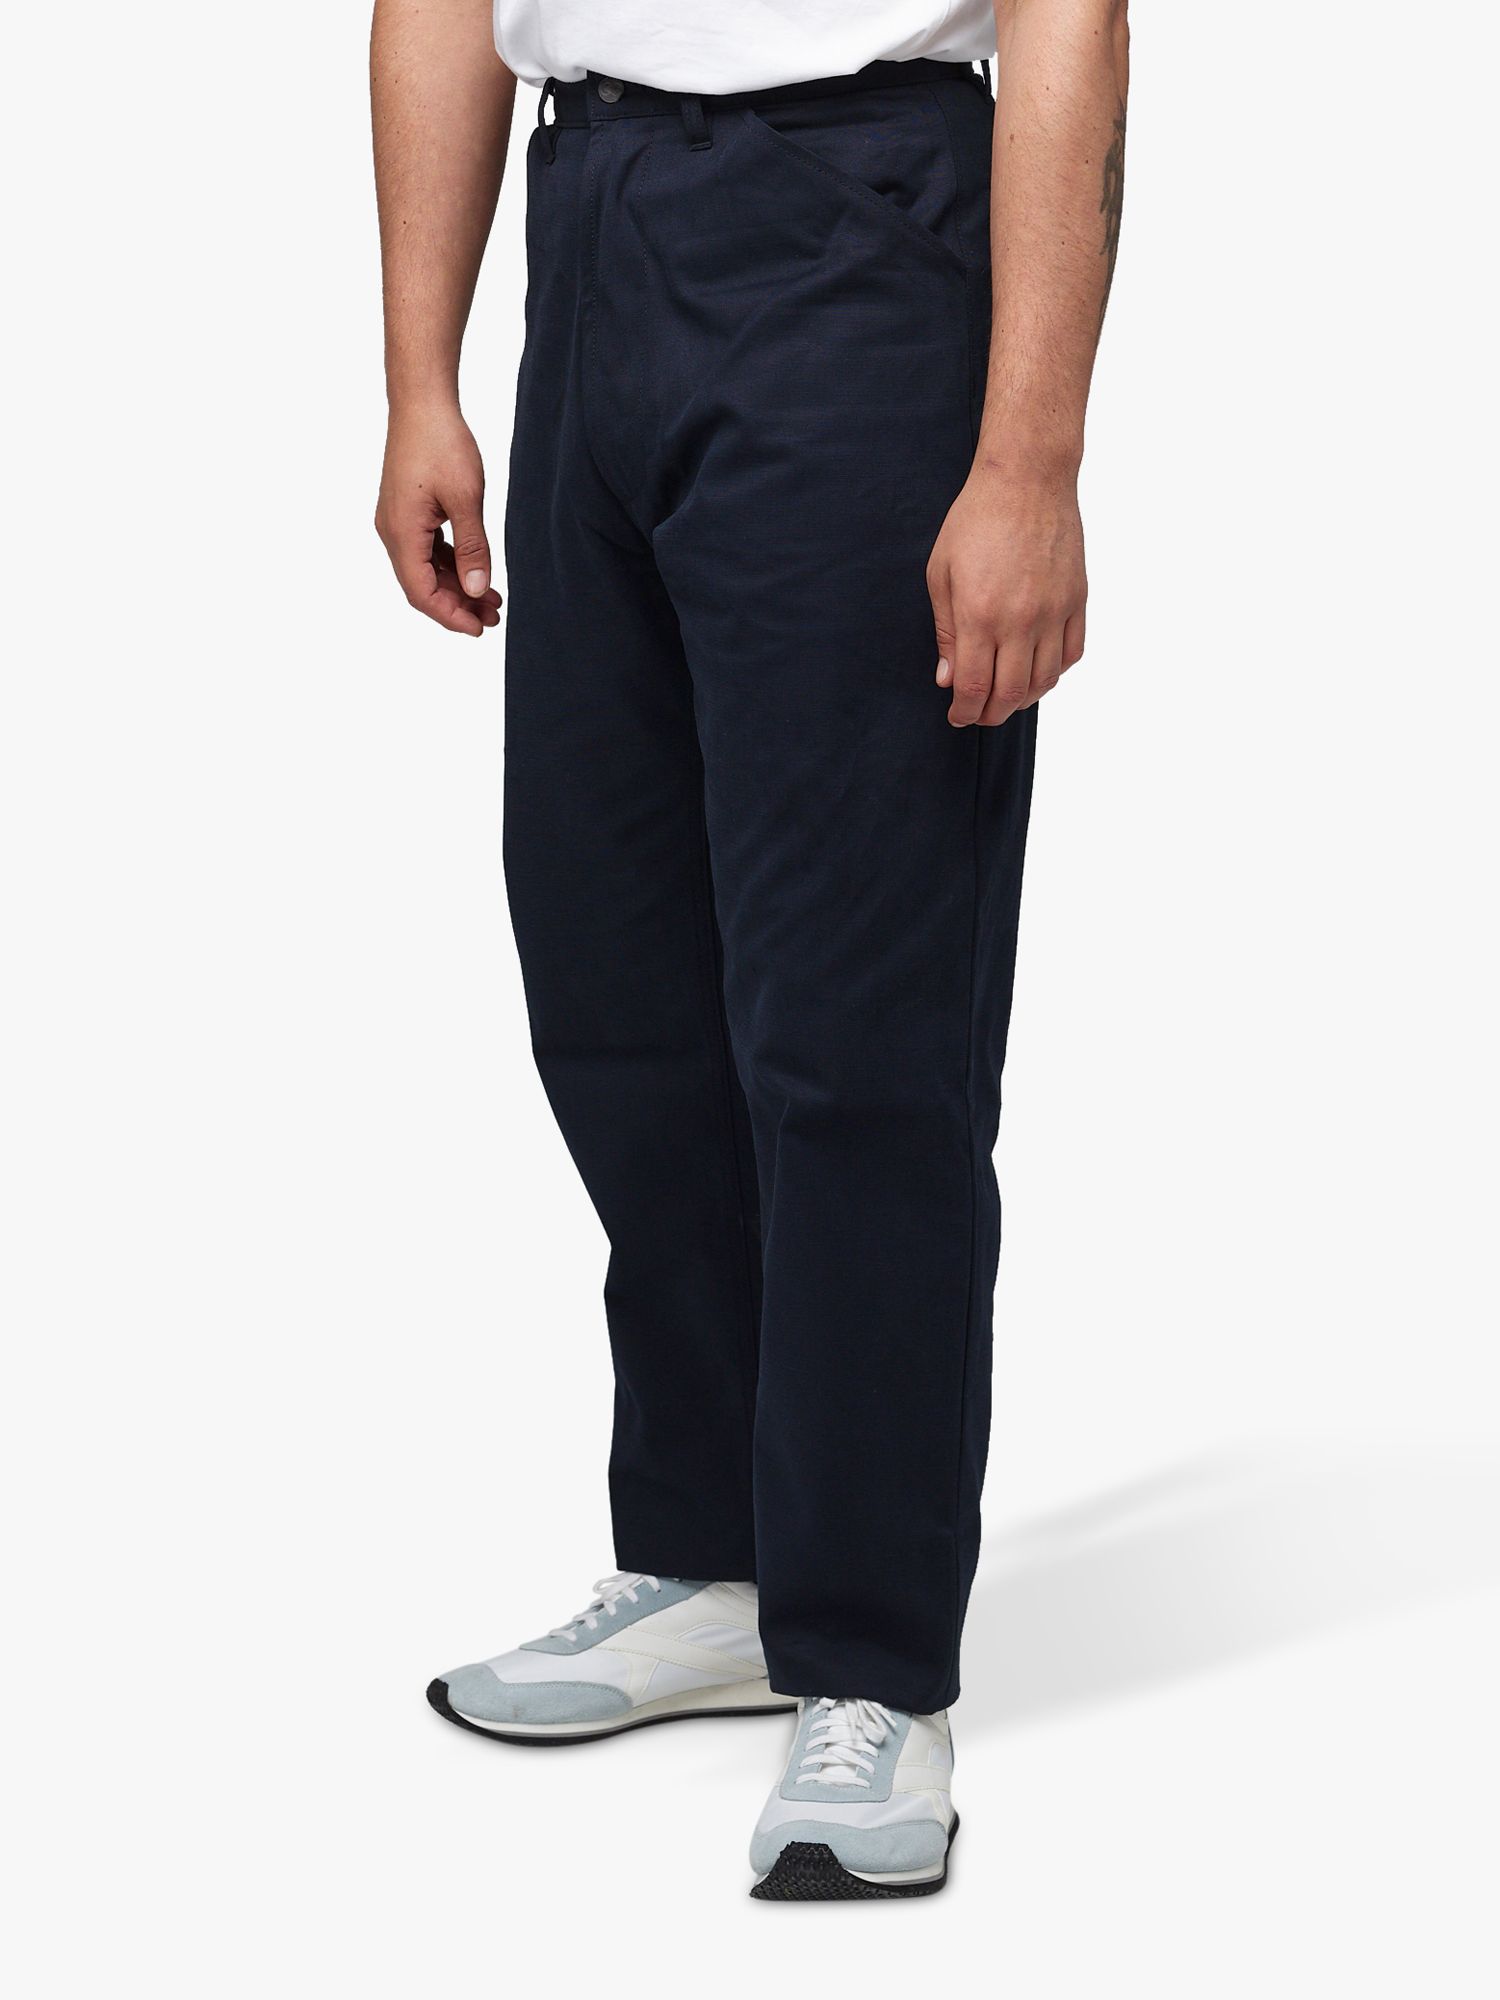 Men's Canvas Chore Trousers - Putty - Community Clothing